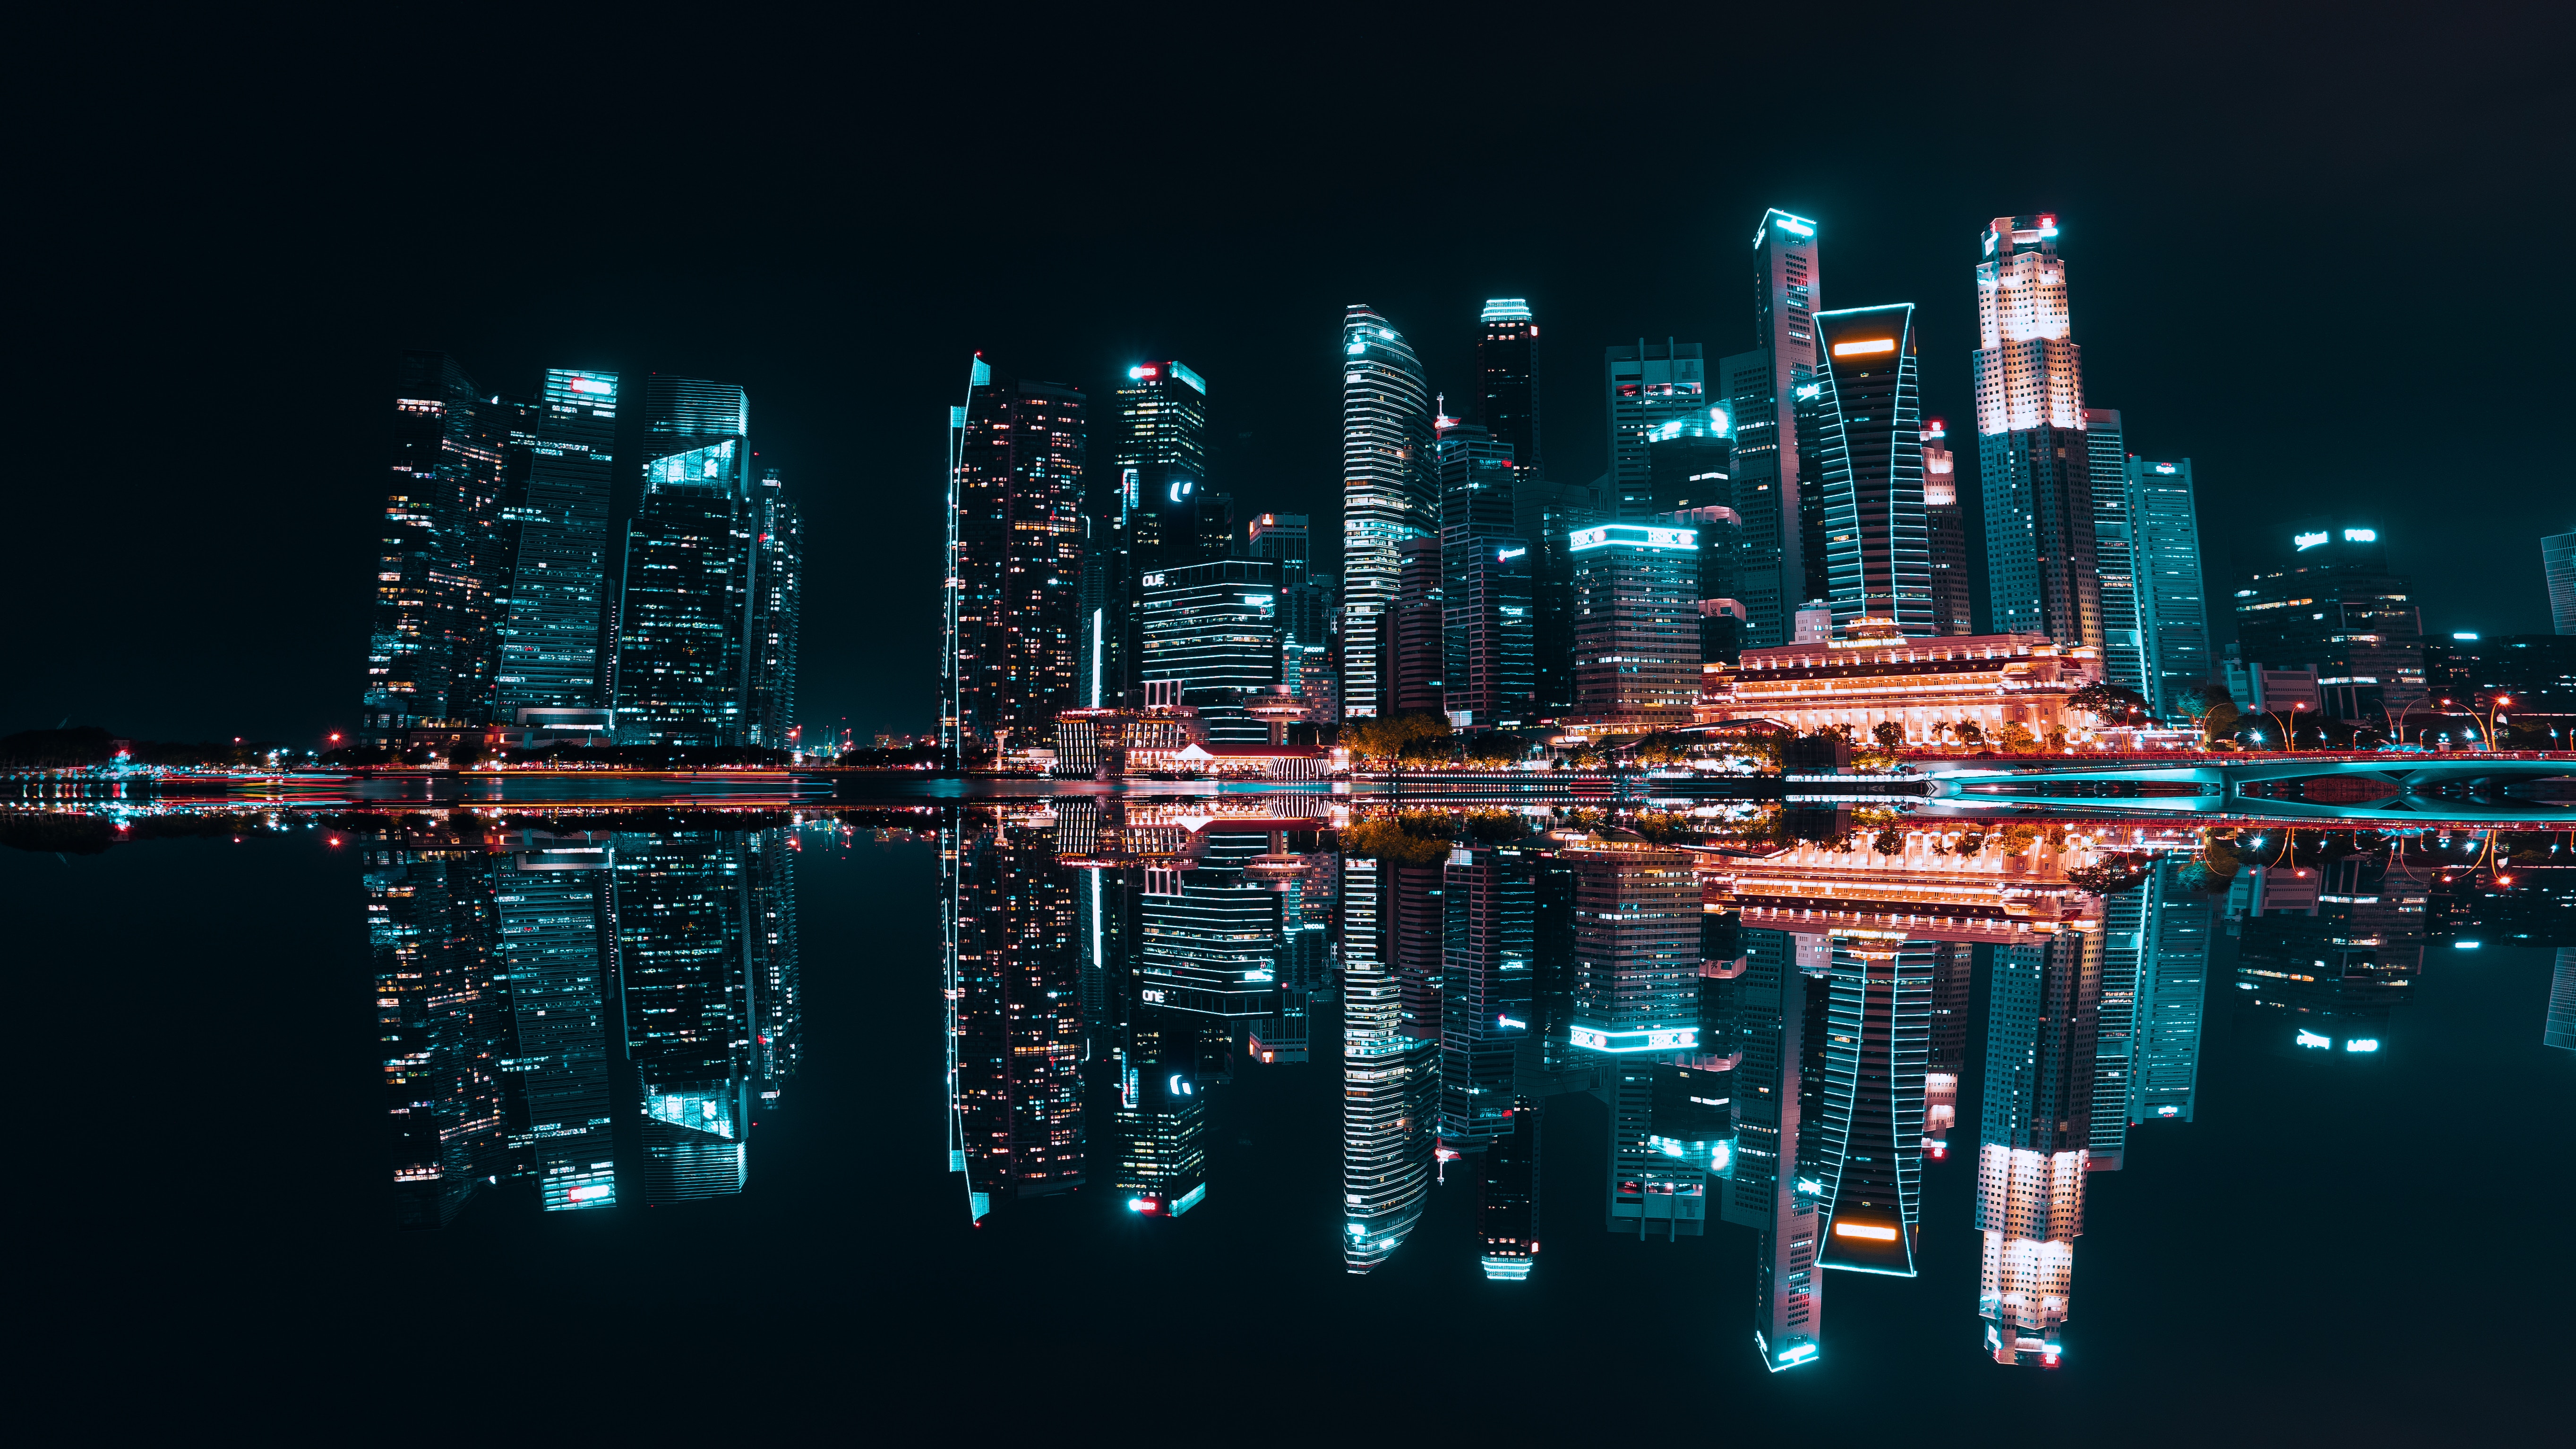 night city, illumination, lake, cities, building, reflection, skyscrapers, backlight, electricity